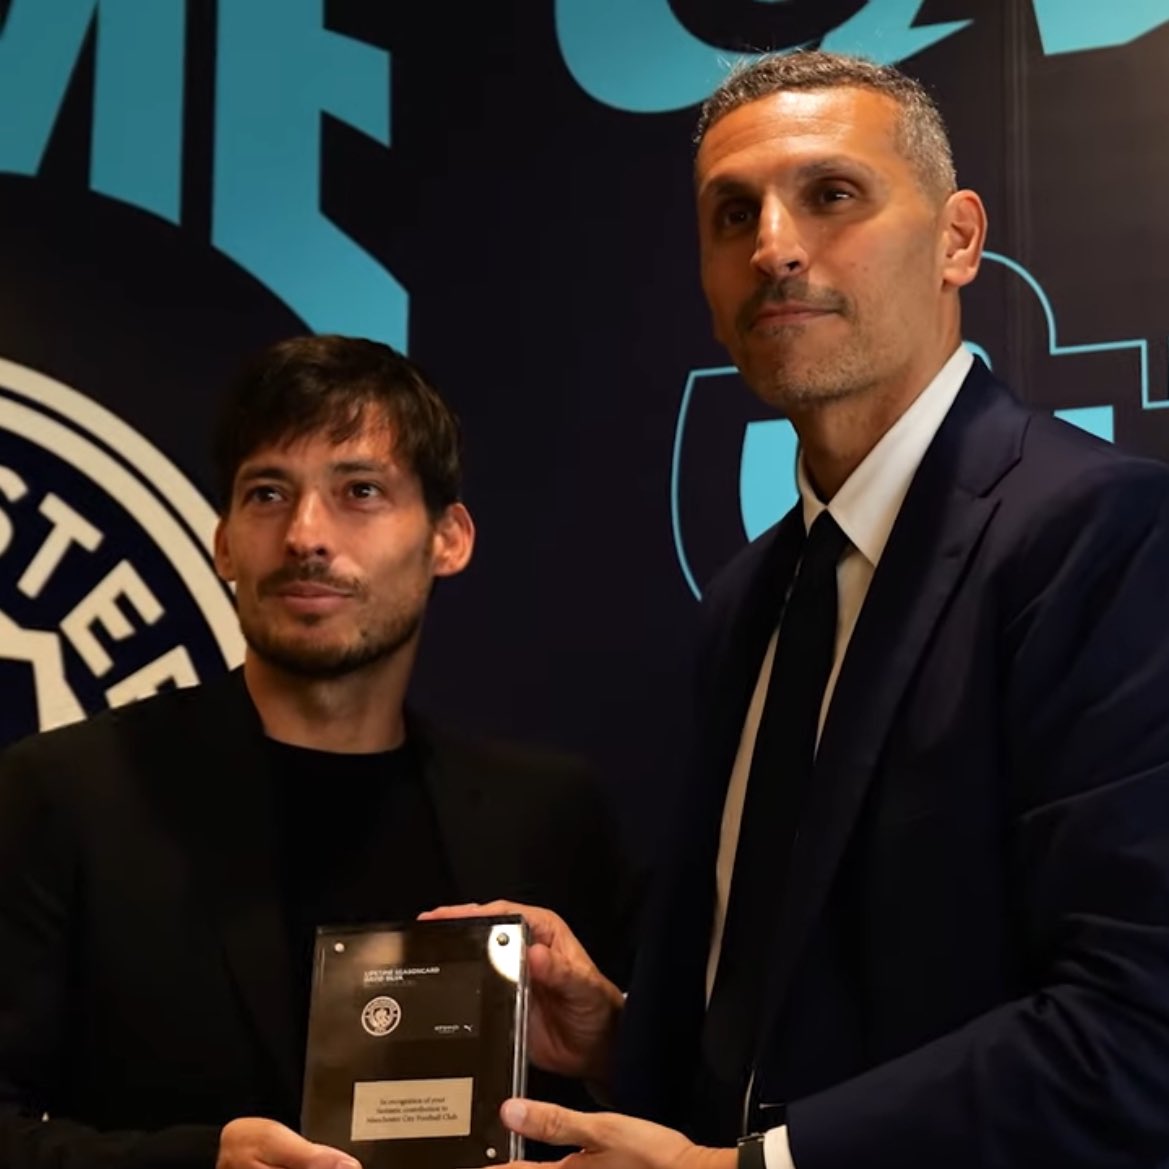 David @21LVA has received a lifetime seasoncard from #ManCity. 🥹

Khaldoon Al Mubarak: “We’ll never forget what you’ve done for this Club. We’re so happy. That’s why I wanted to give you this, a small recognition from the Club for everything you’ve done. Thank you very much.” 🩵